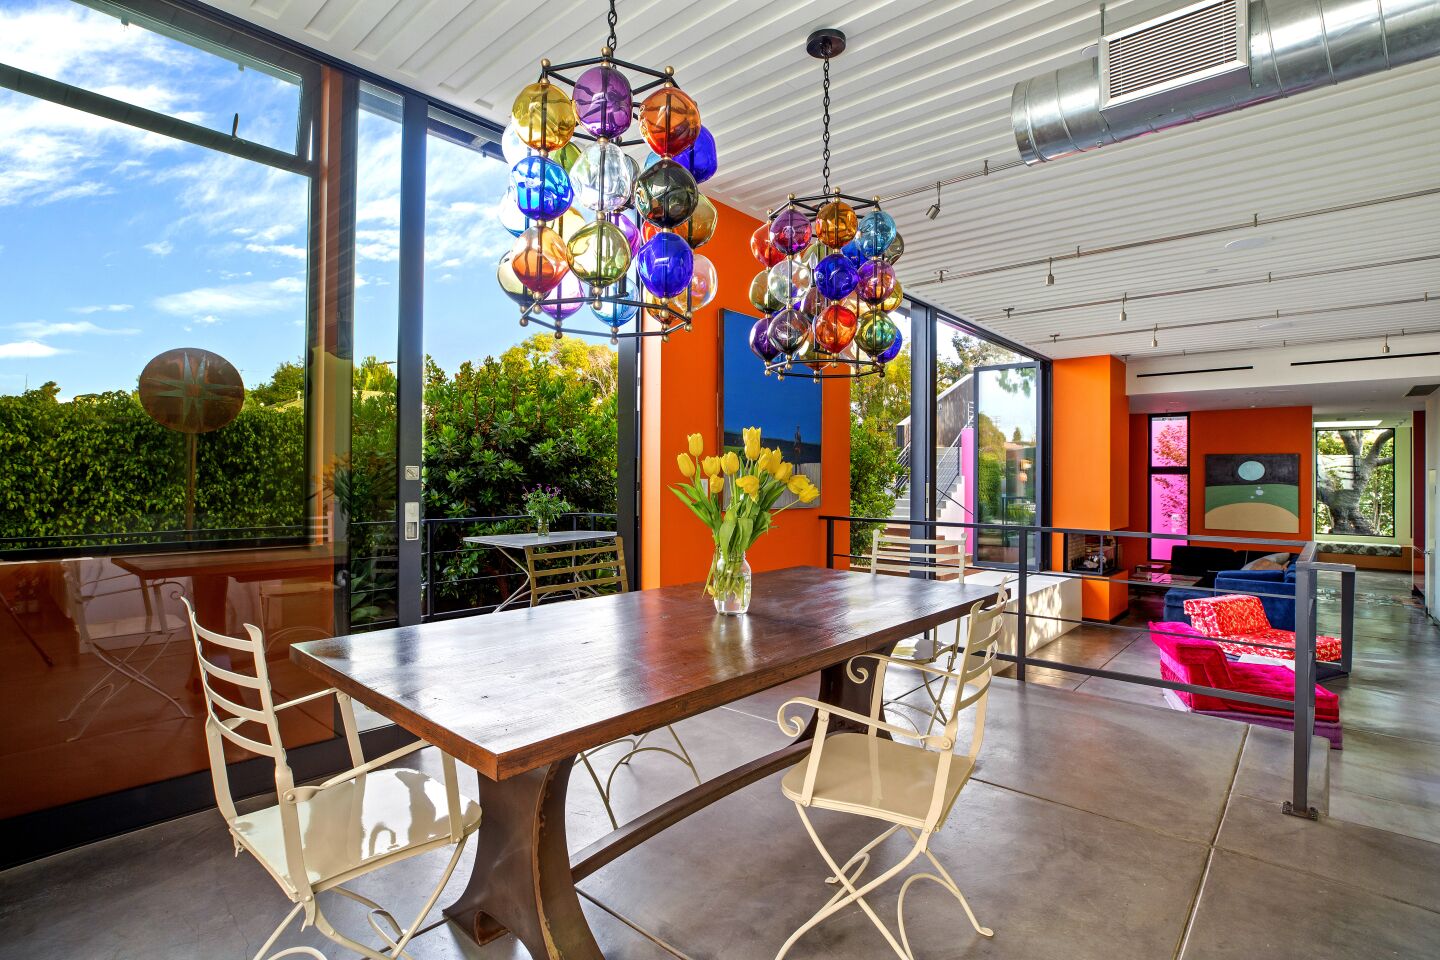 The Venice compound features 3,414 square feet of living space with vibrant hues and offbeat art installations in its open-concept floor plan.